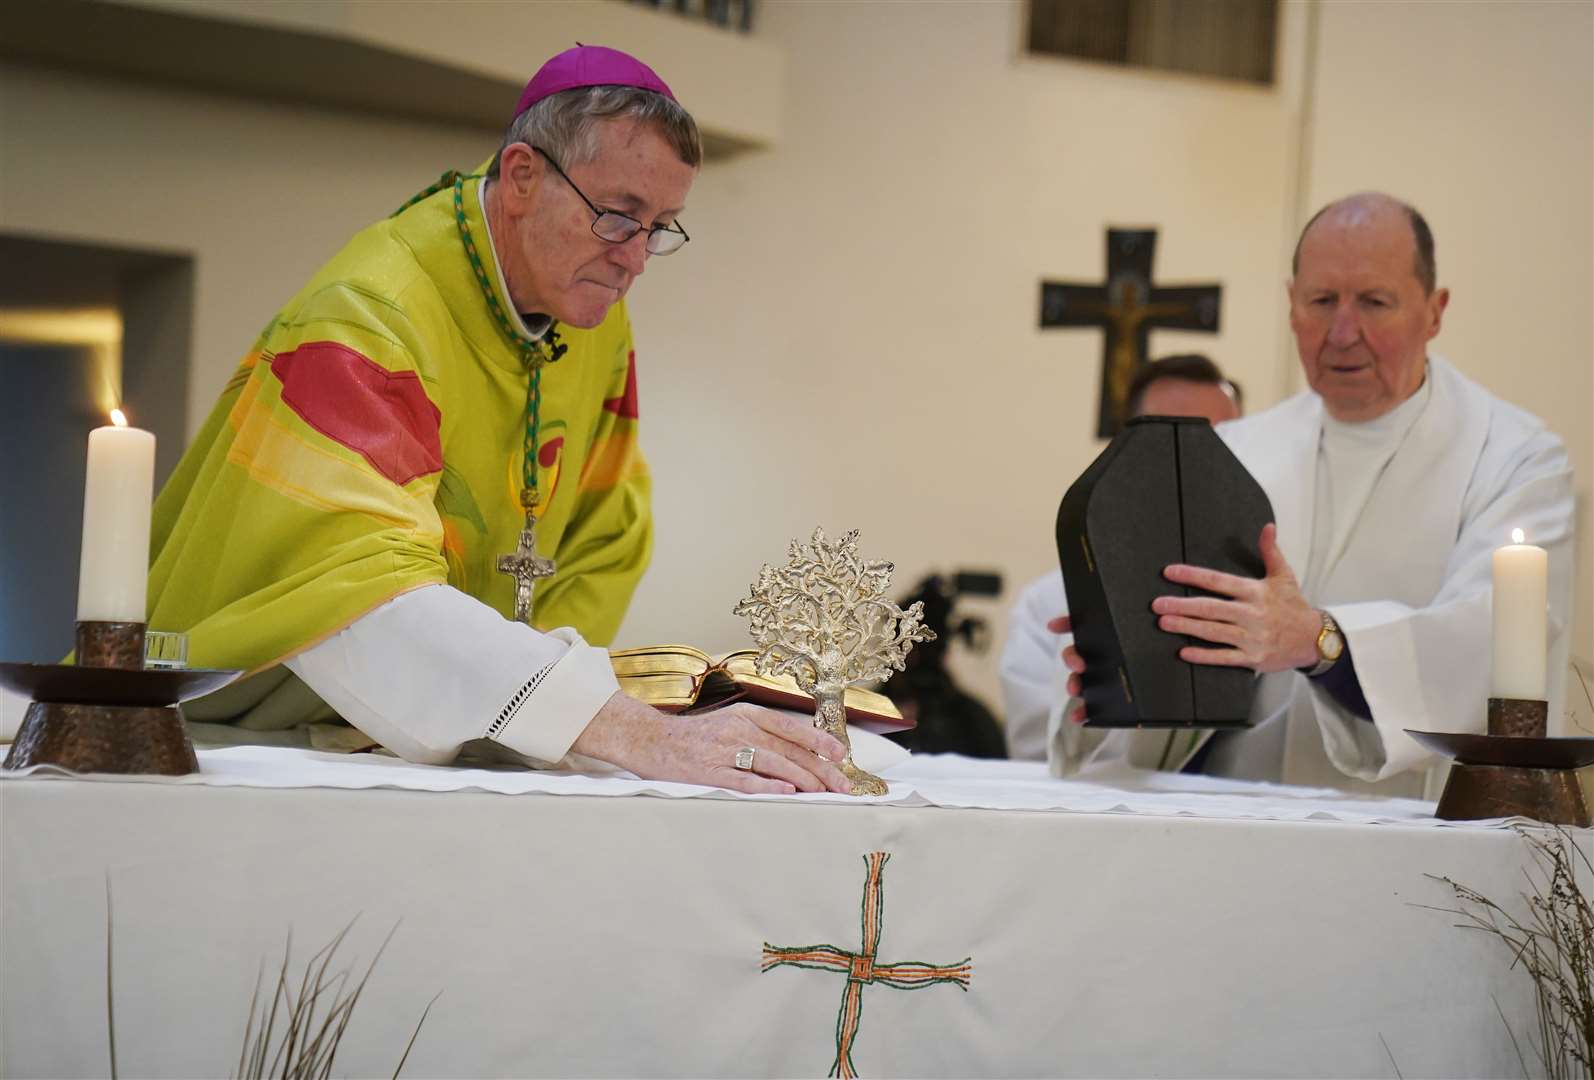 Bishop of Kildare & Leighlin Denis Nulty places the relic of St Brigid on the altar of St Brigid’s Parish Church in Kildare (Brian Lawless/PA)